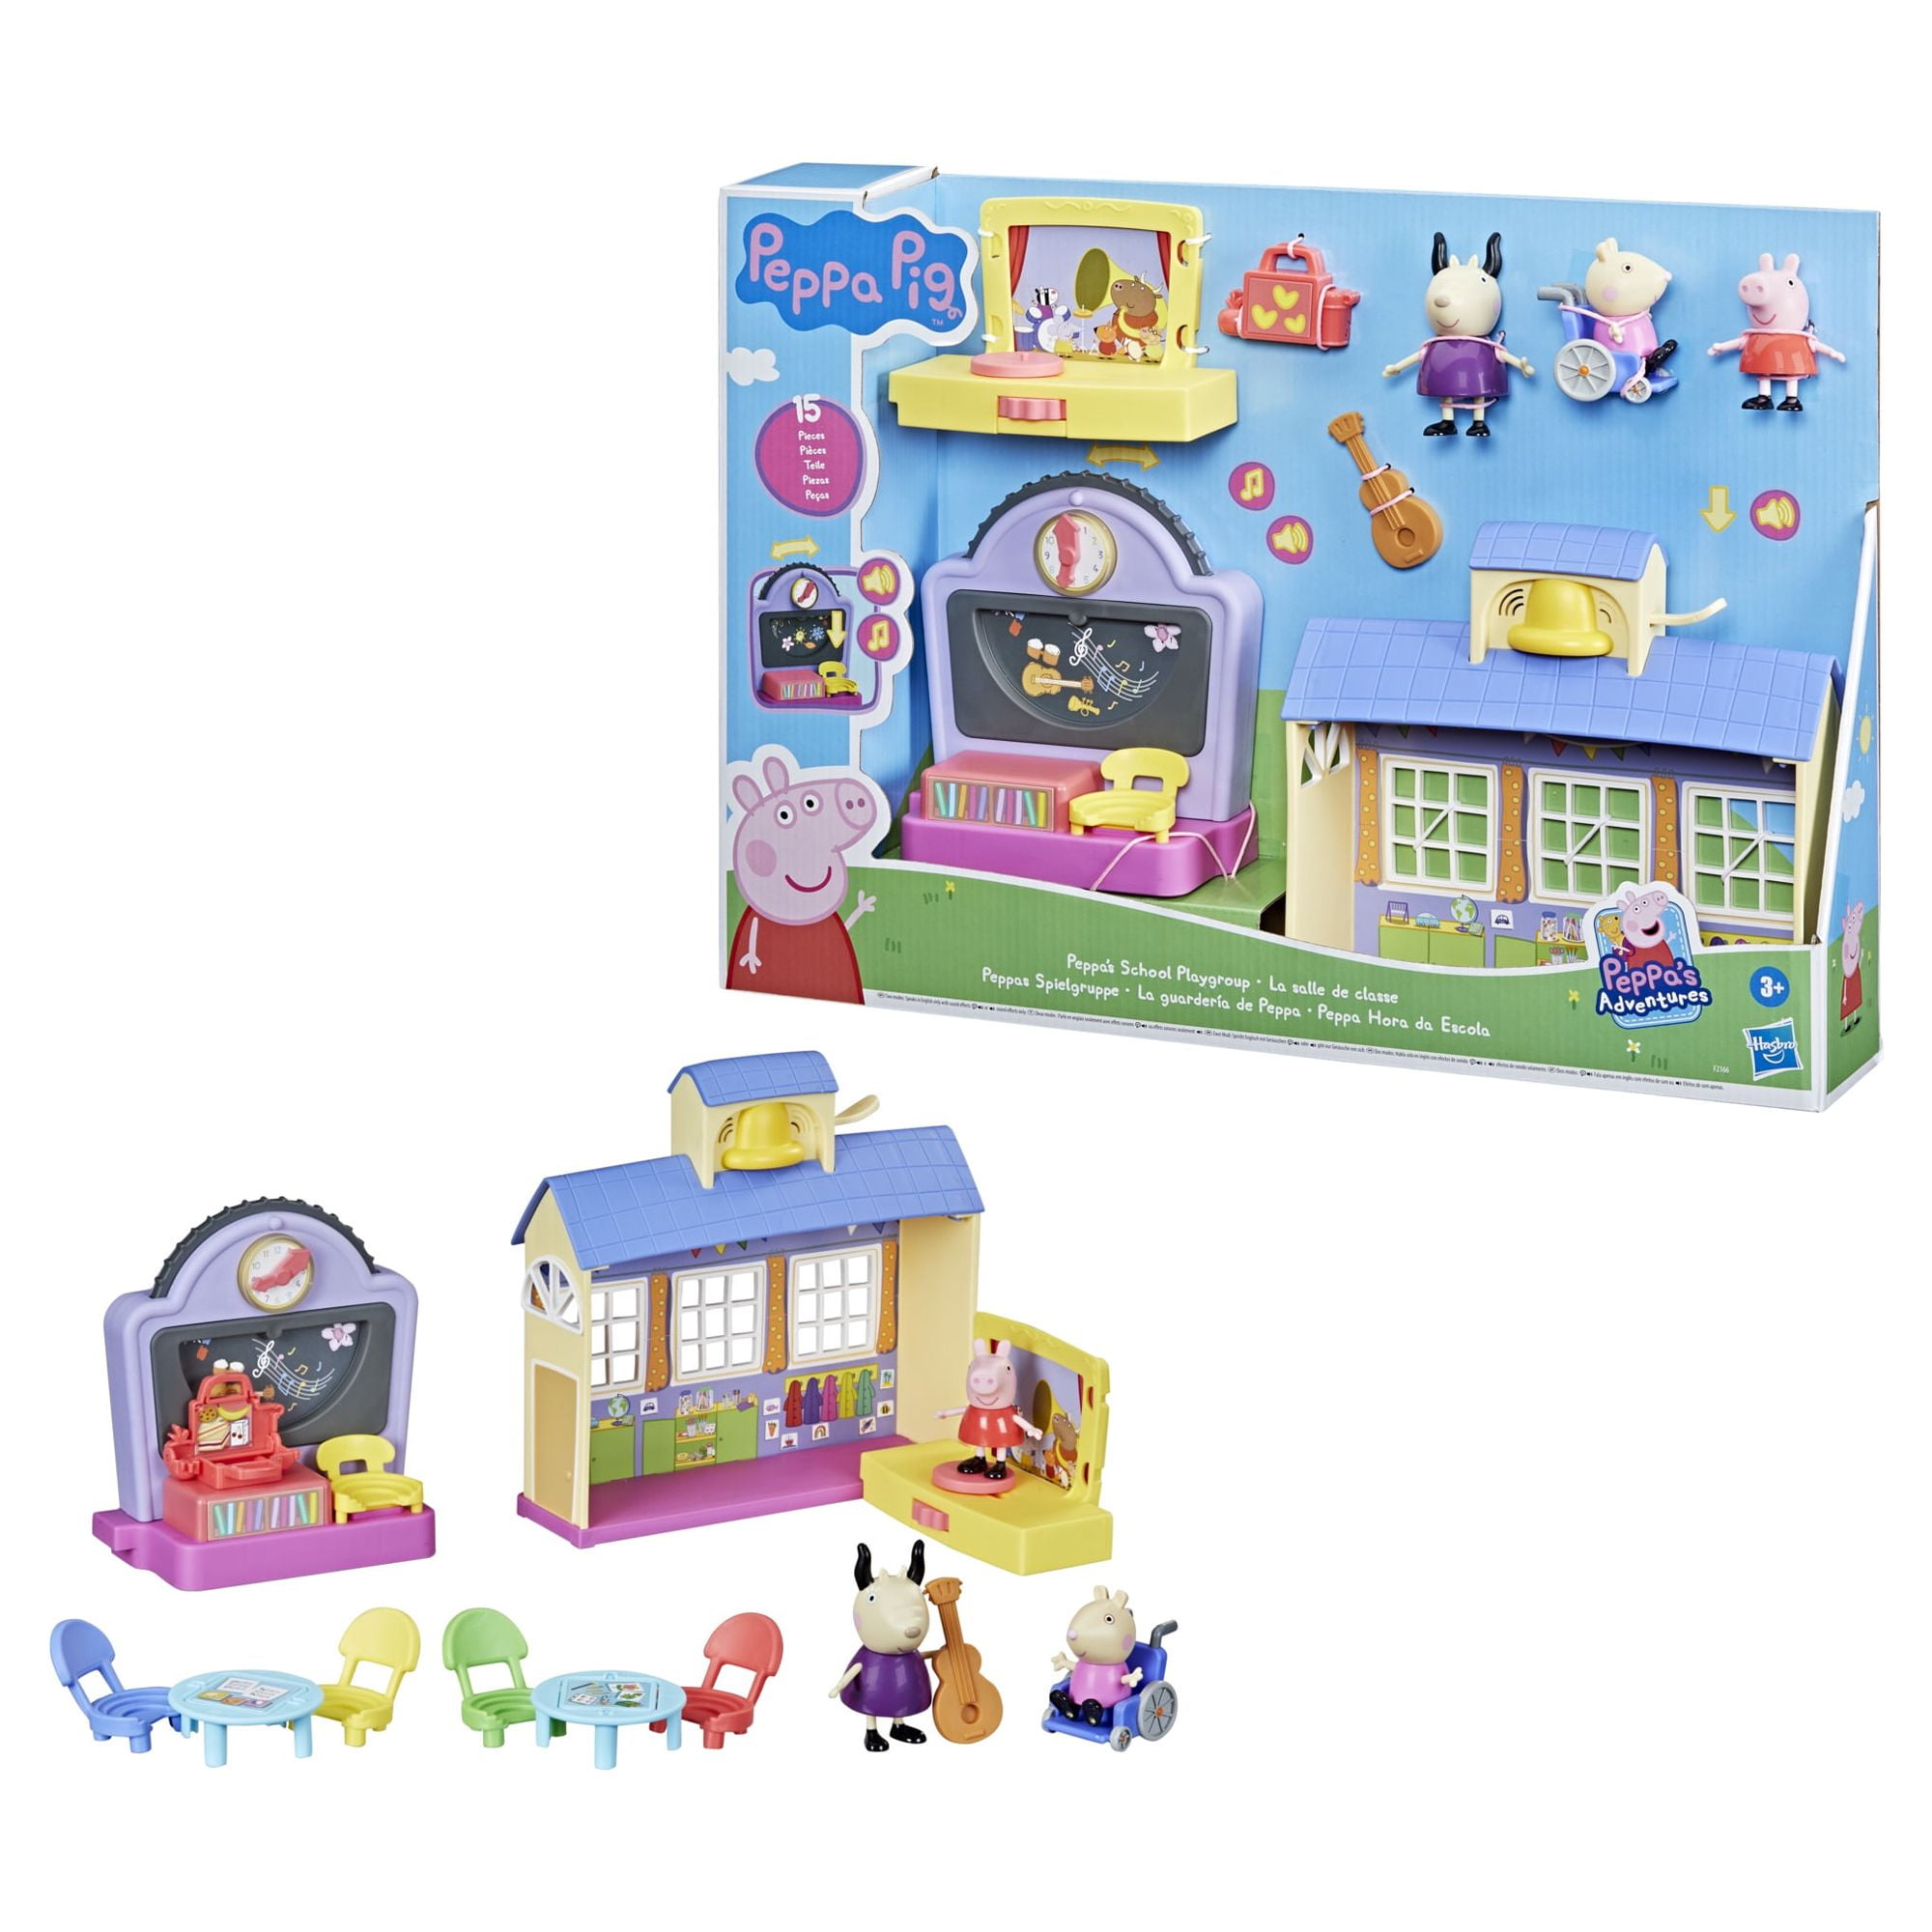 Peppa Pig Grandparents House (NEW) Toy Set Ages 3+